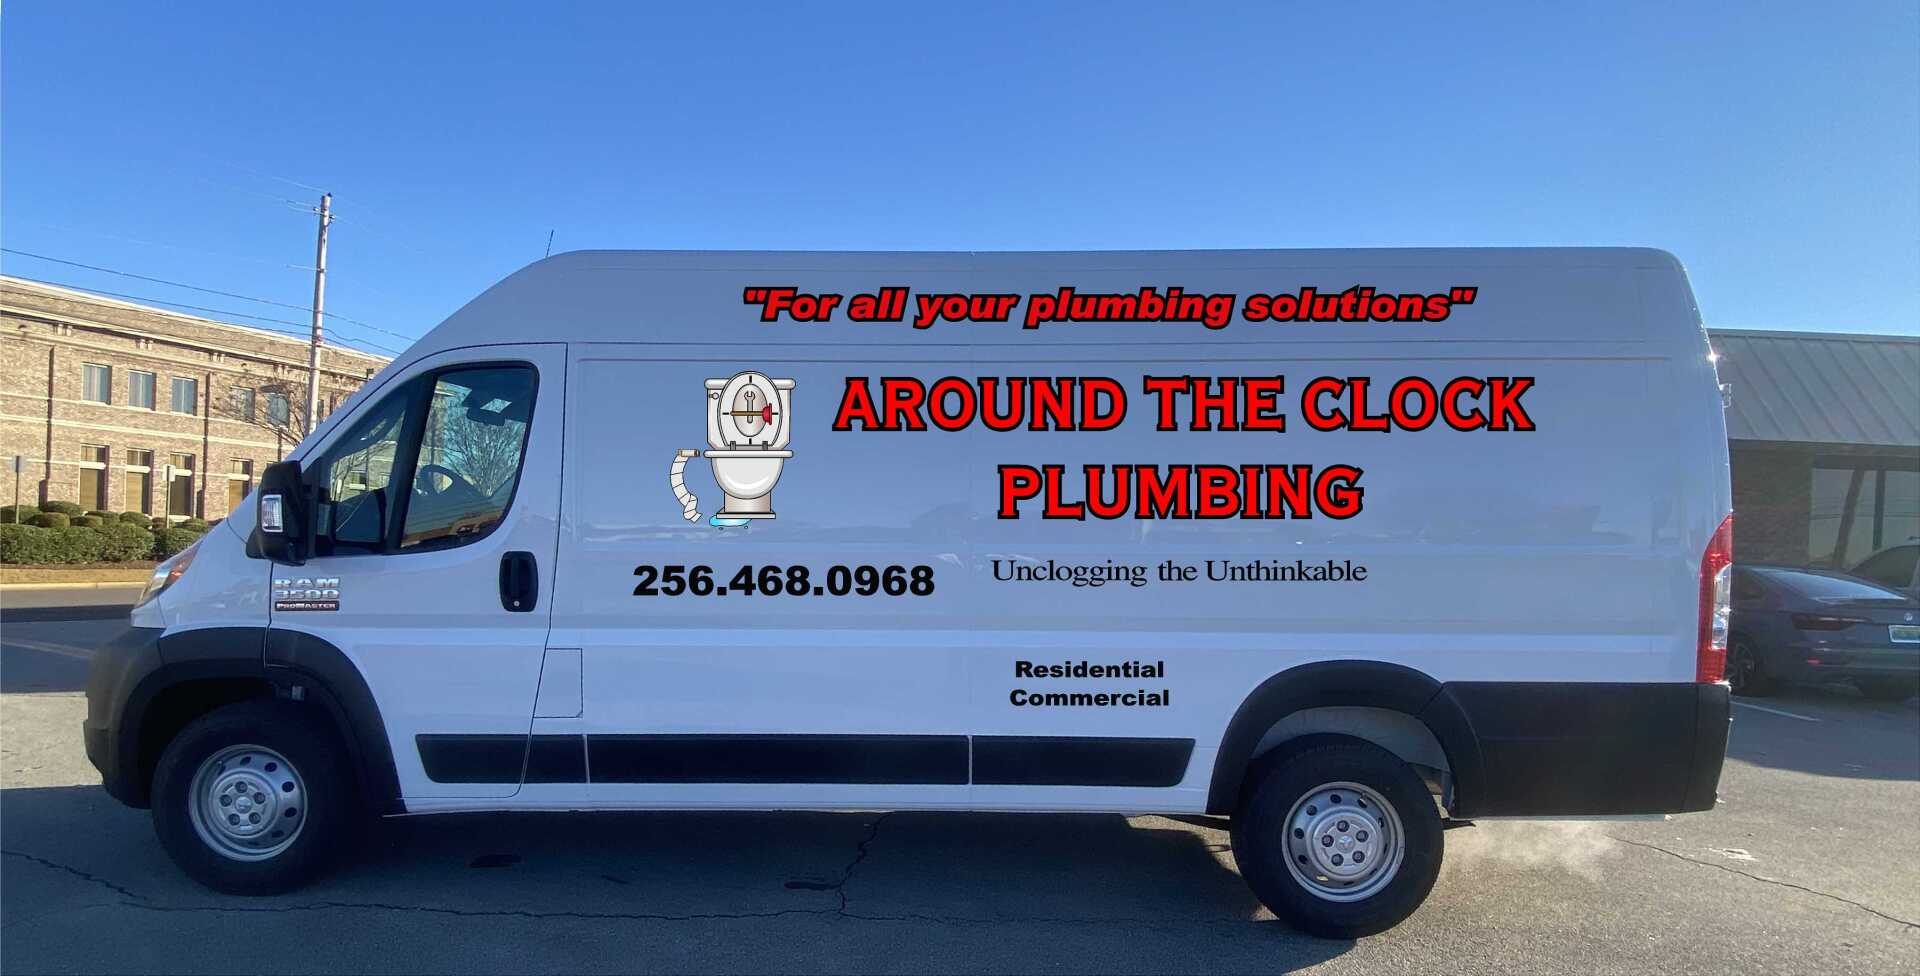 A white van for around the clock plumbing is parked in a parking lot.